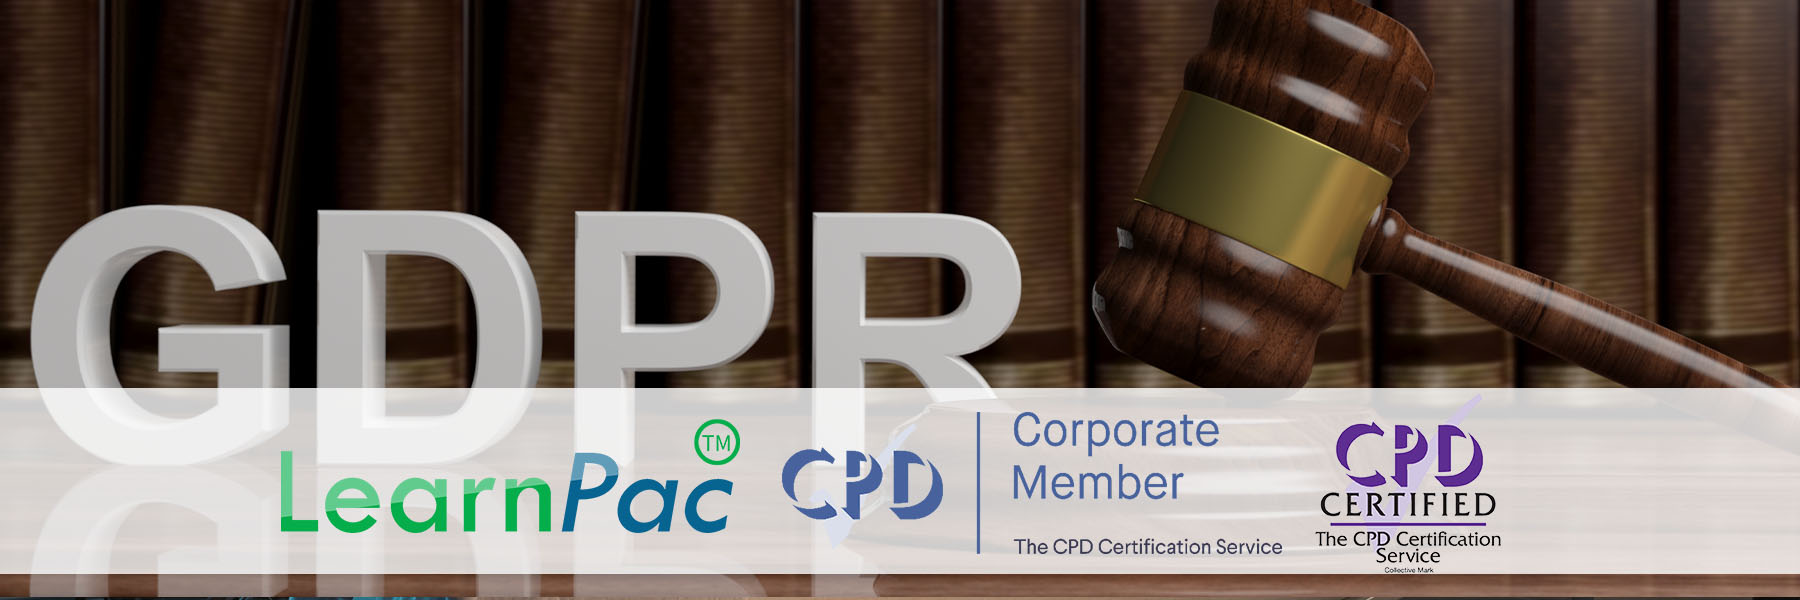 GDPR - E-Learning Courses - LearnPac Systems UK -